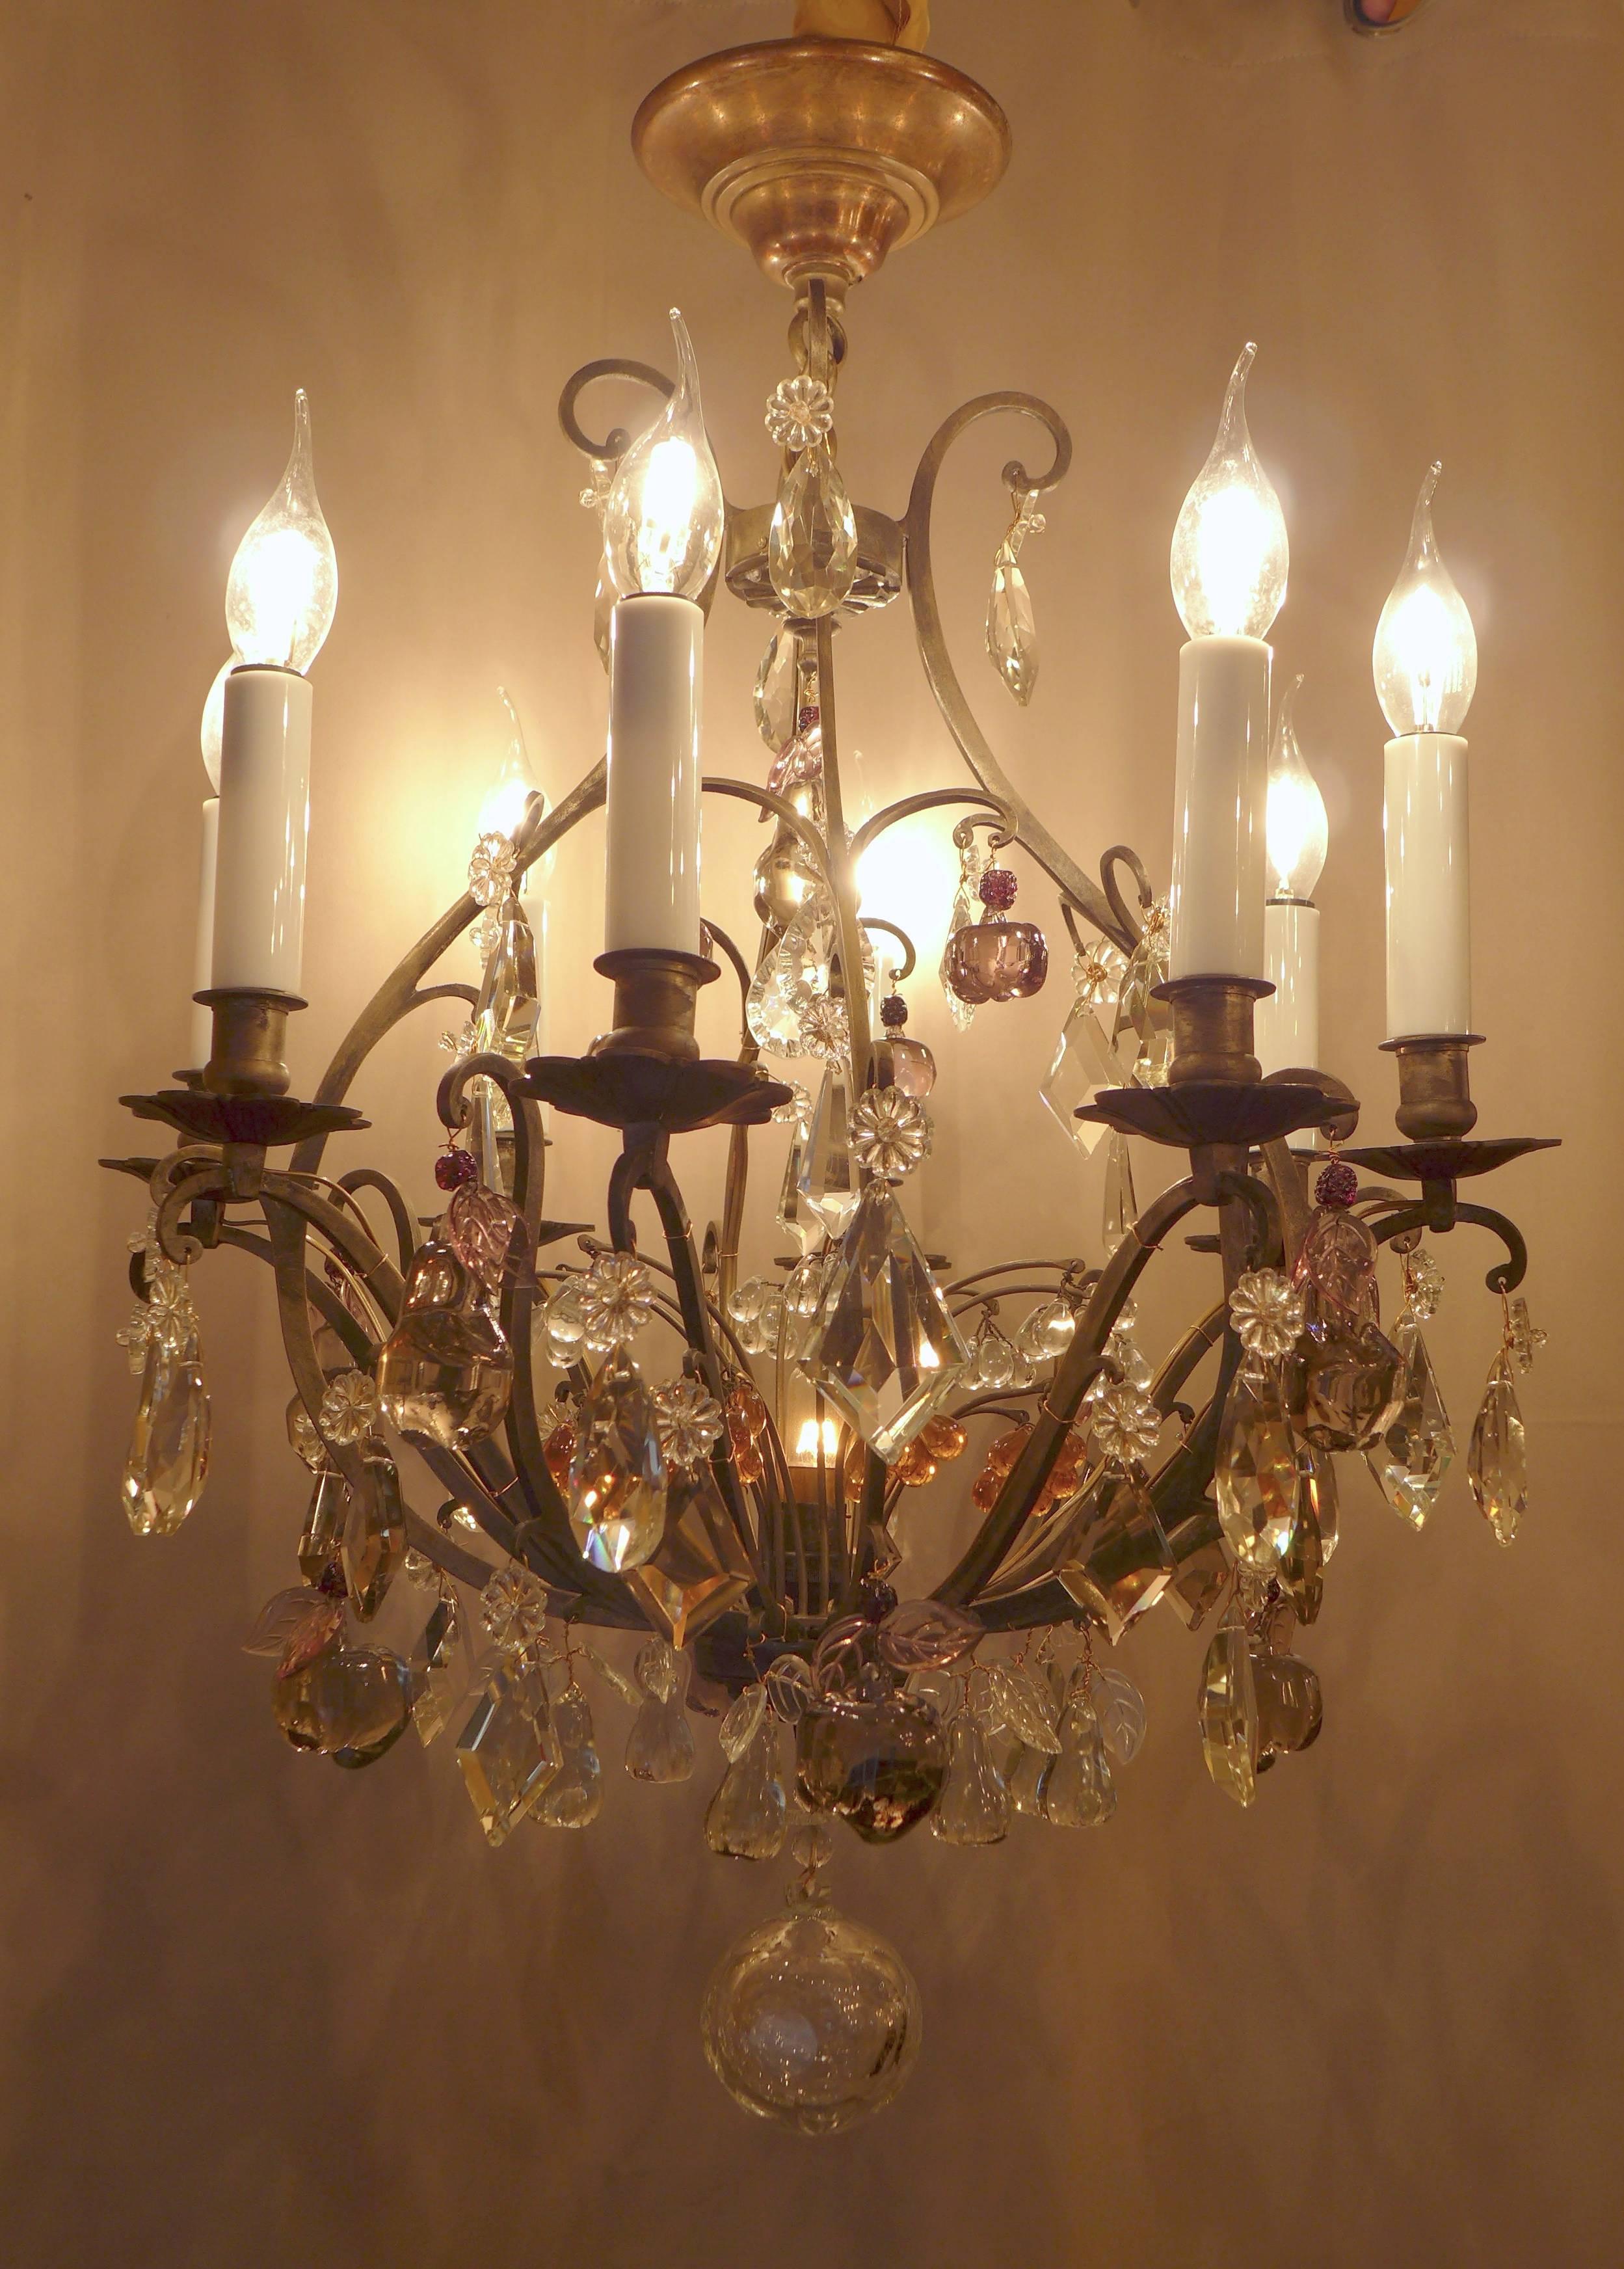 Lovely small patinated bronze and crystal form cage chandelier in the classical Louis XV style. The chandelier is composed of height arm lights. Interesting and gorgeous top quality hand-cut crystal pieces, small pears, pears, apples, grapes,